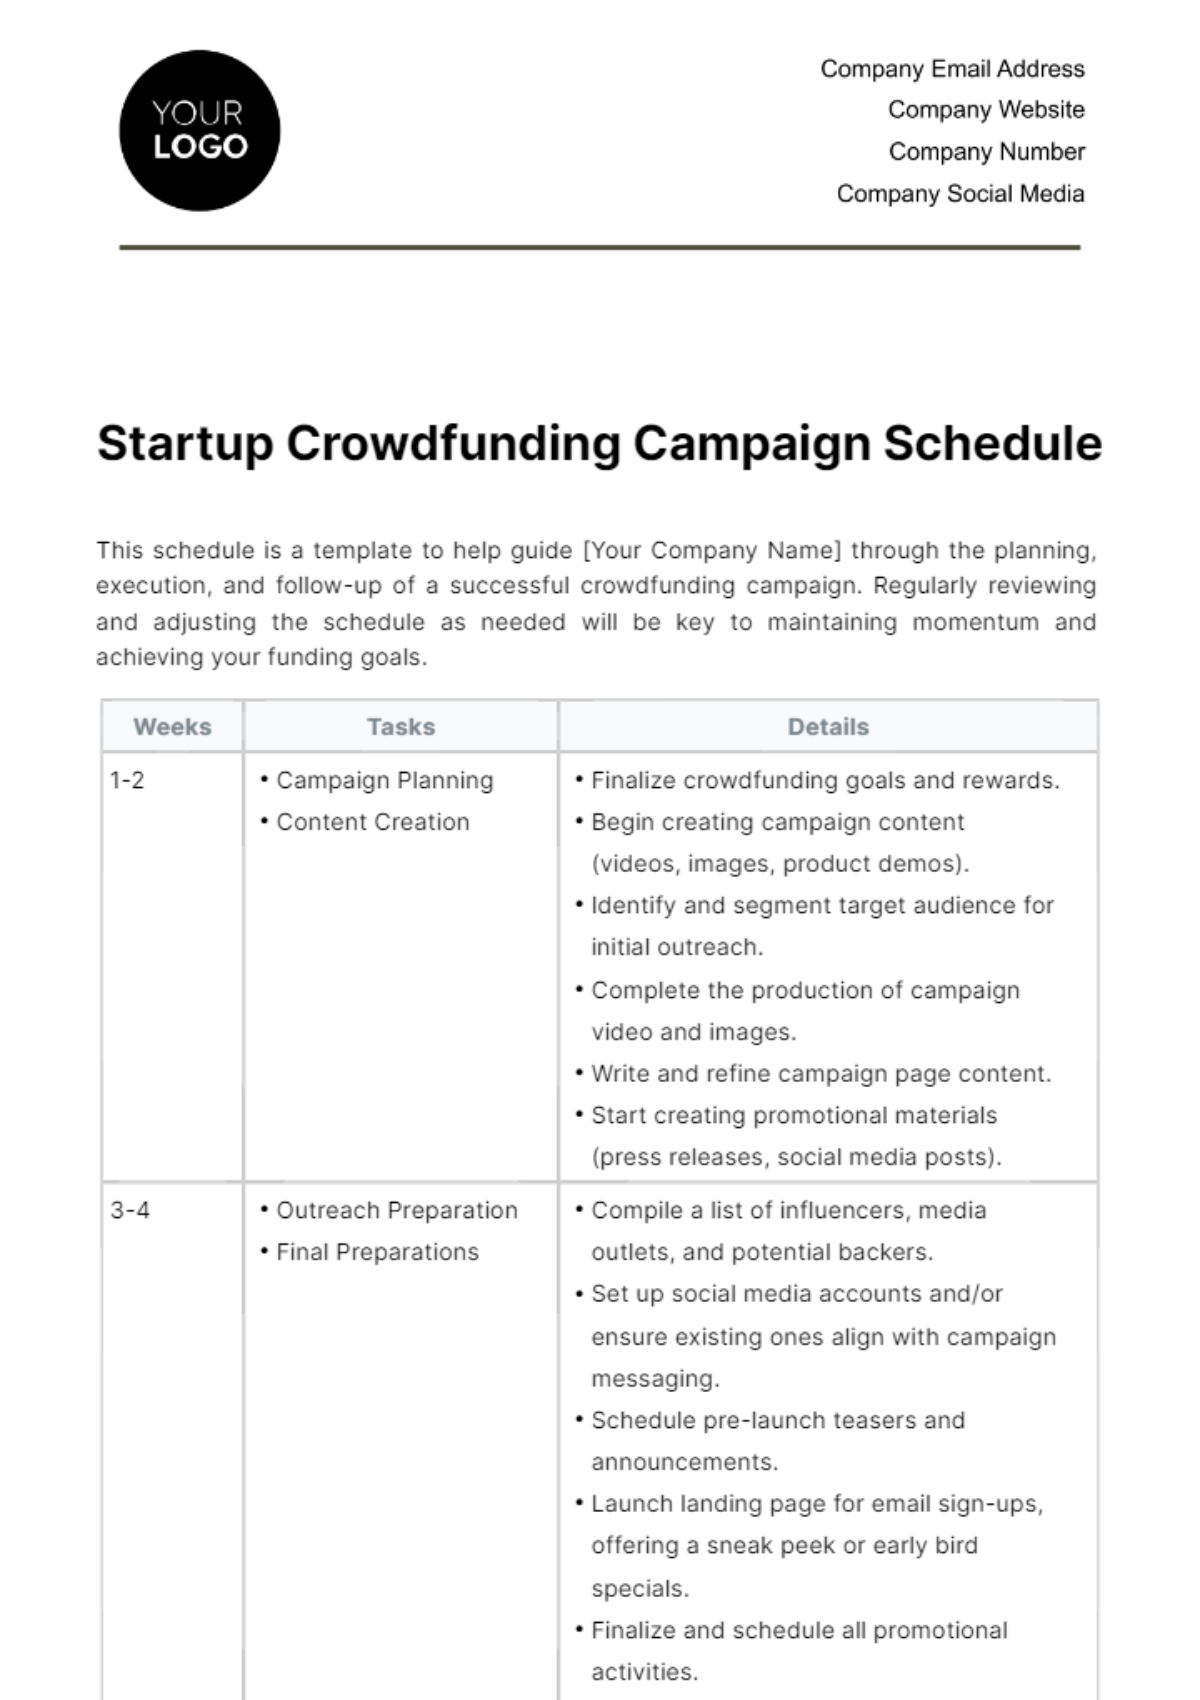 Free Startup Crowdfunding Campaign Schedule Template